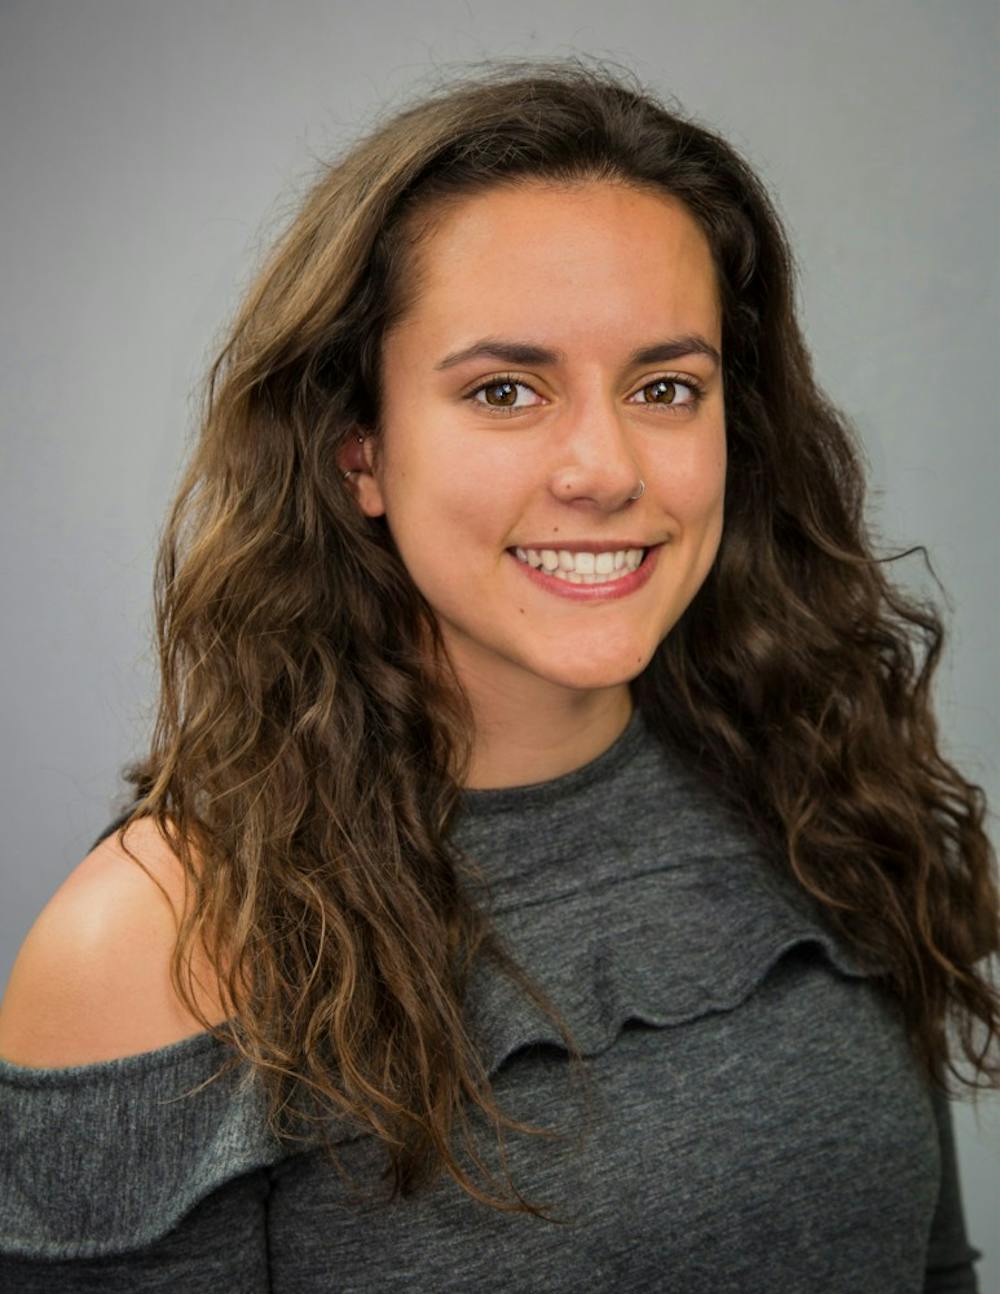 <p>Gianna Damico came to UB unsure about what she wanted to pursue. Now between balancing academics, athletics and art, she’s unsure about what to pursue first.</p>